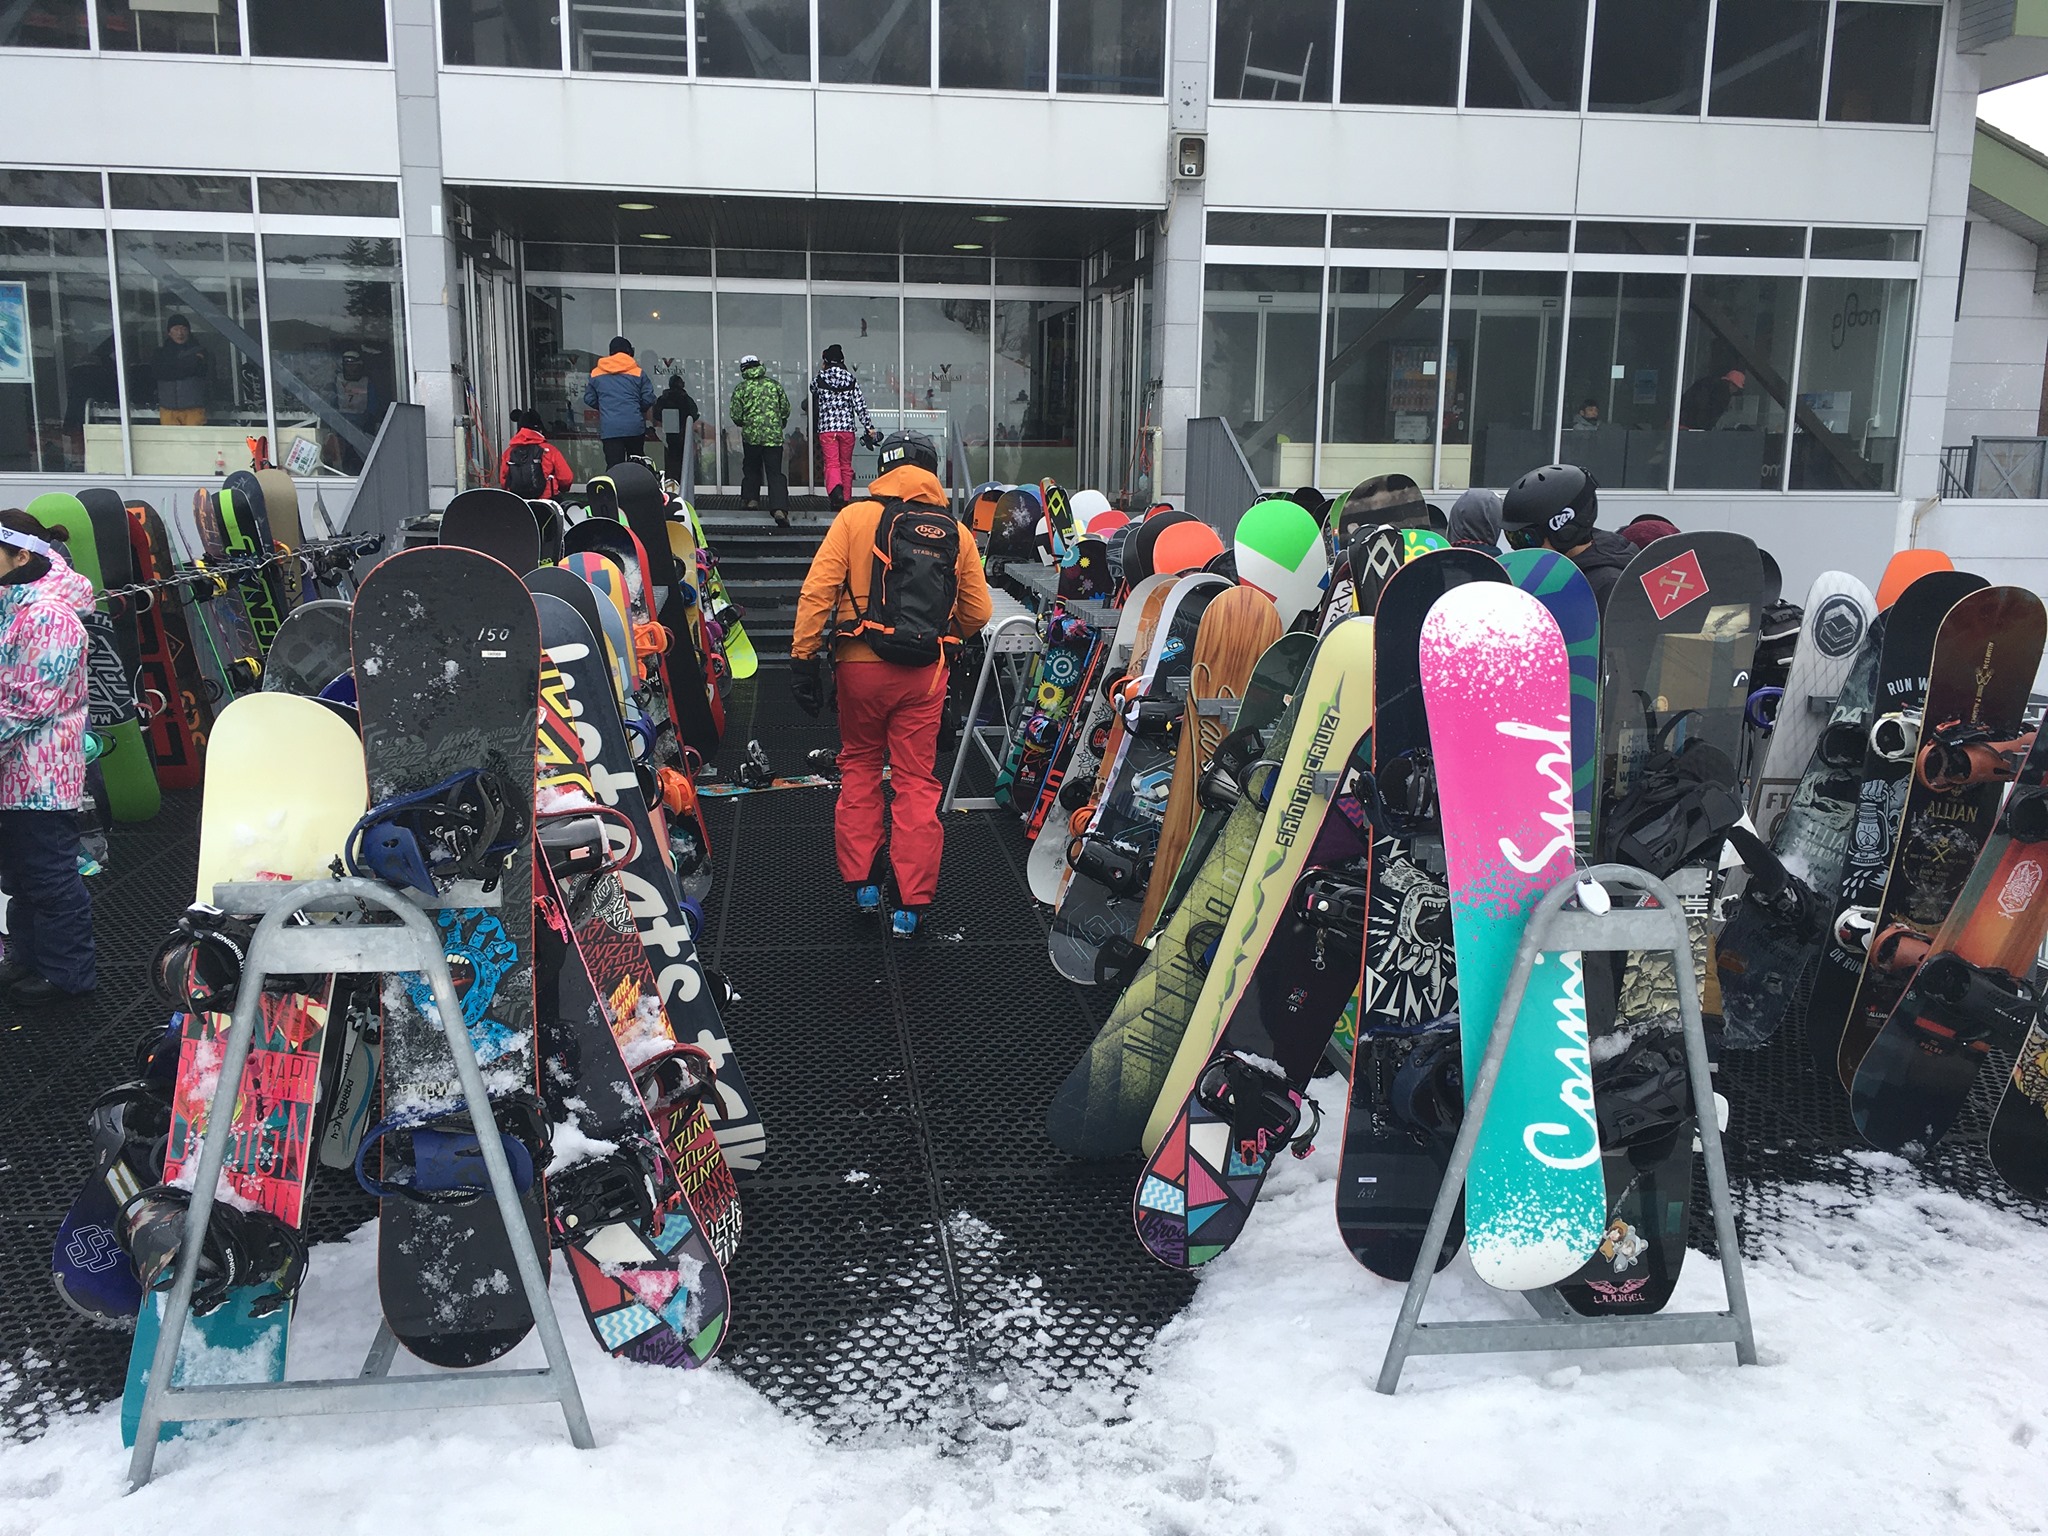 Trying to find a pair of skis in a sea of snowboards